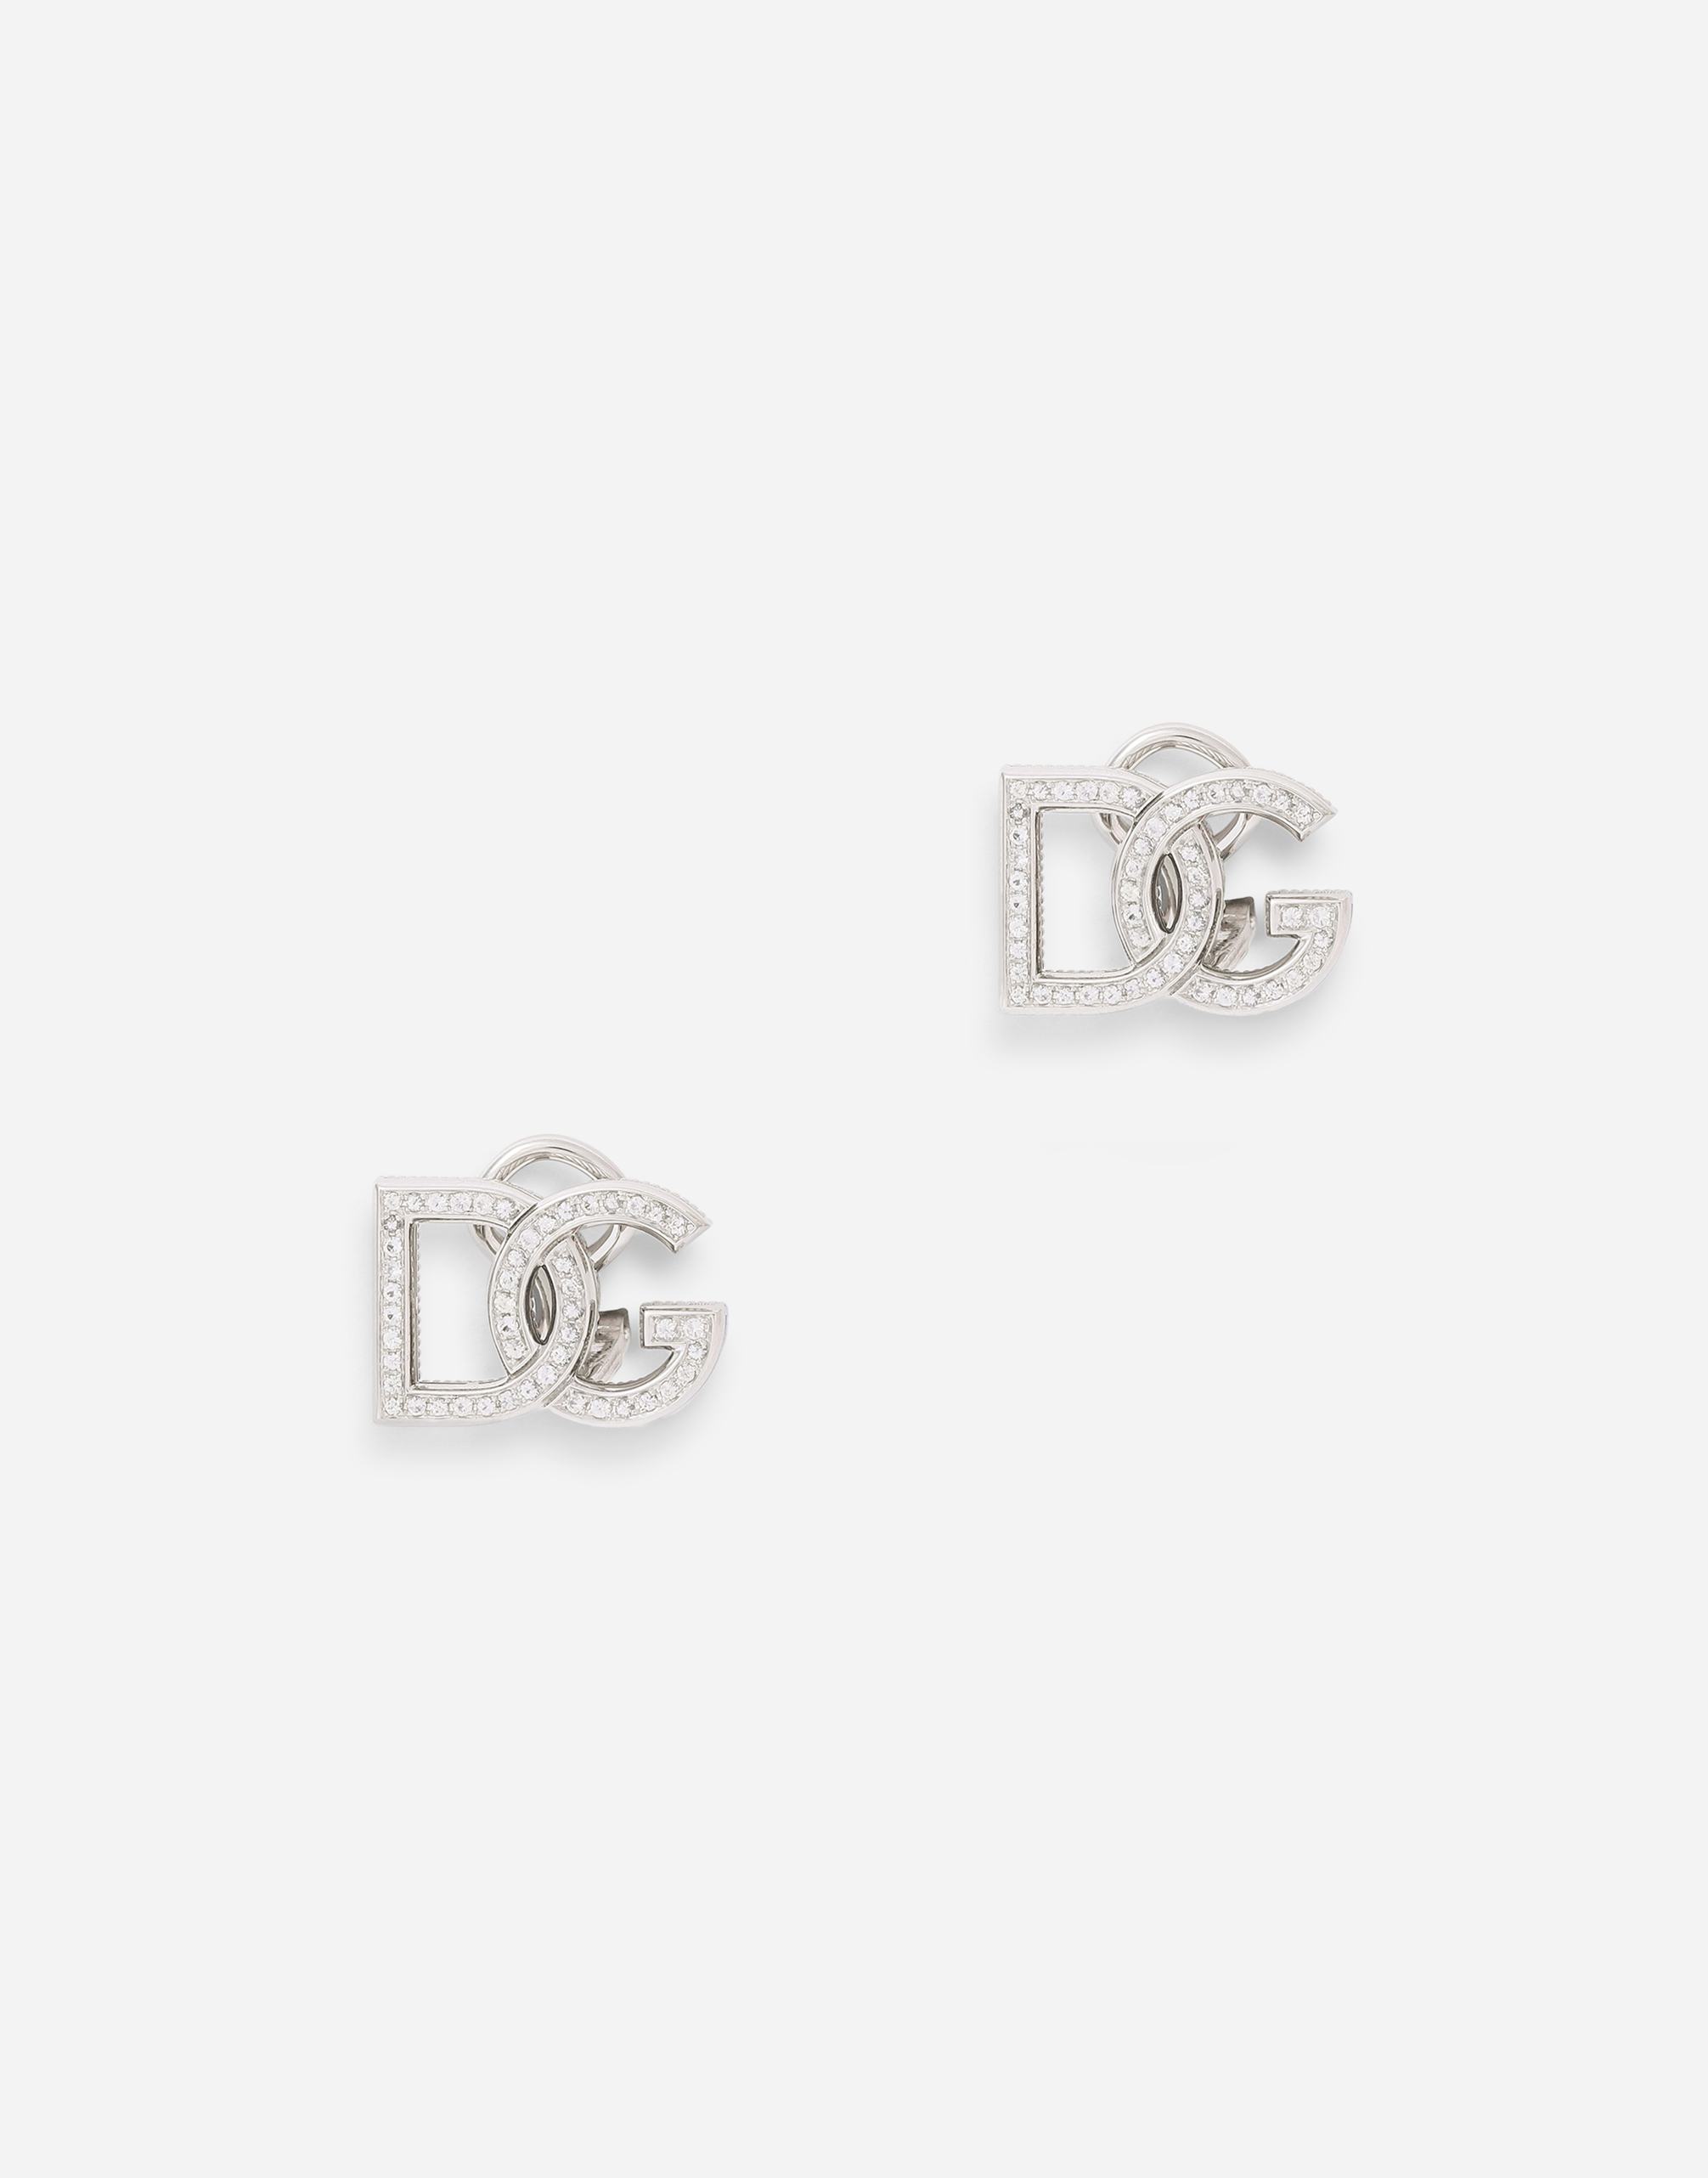 DOLCE & GABBANA LOGO CLIP-ON EARRINGS IN WHITE 18KT GOLD WITH COLOURLESS SAPPHIRES WHITE GOLD FEMALE ONESIZE